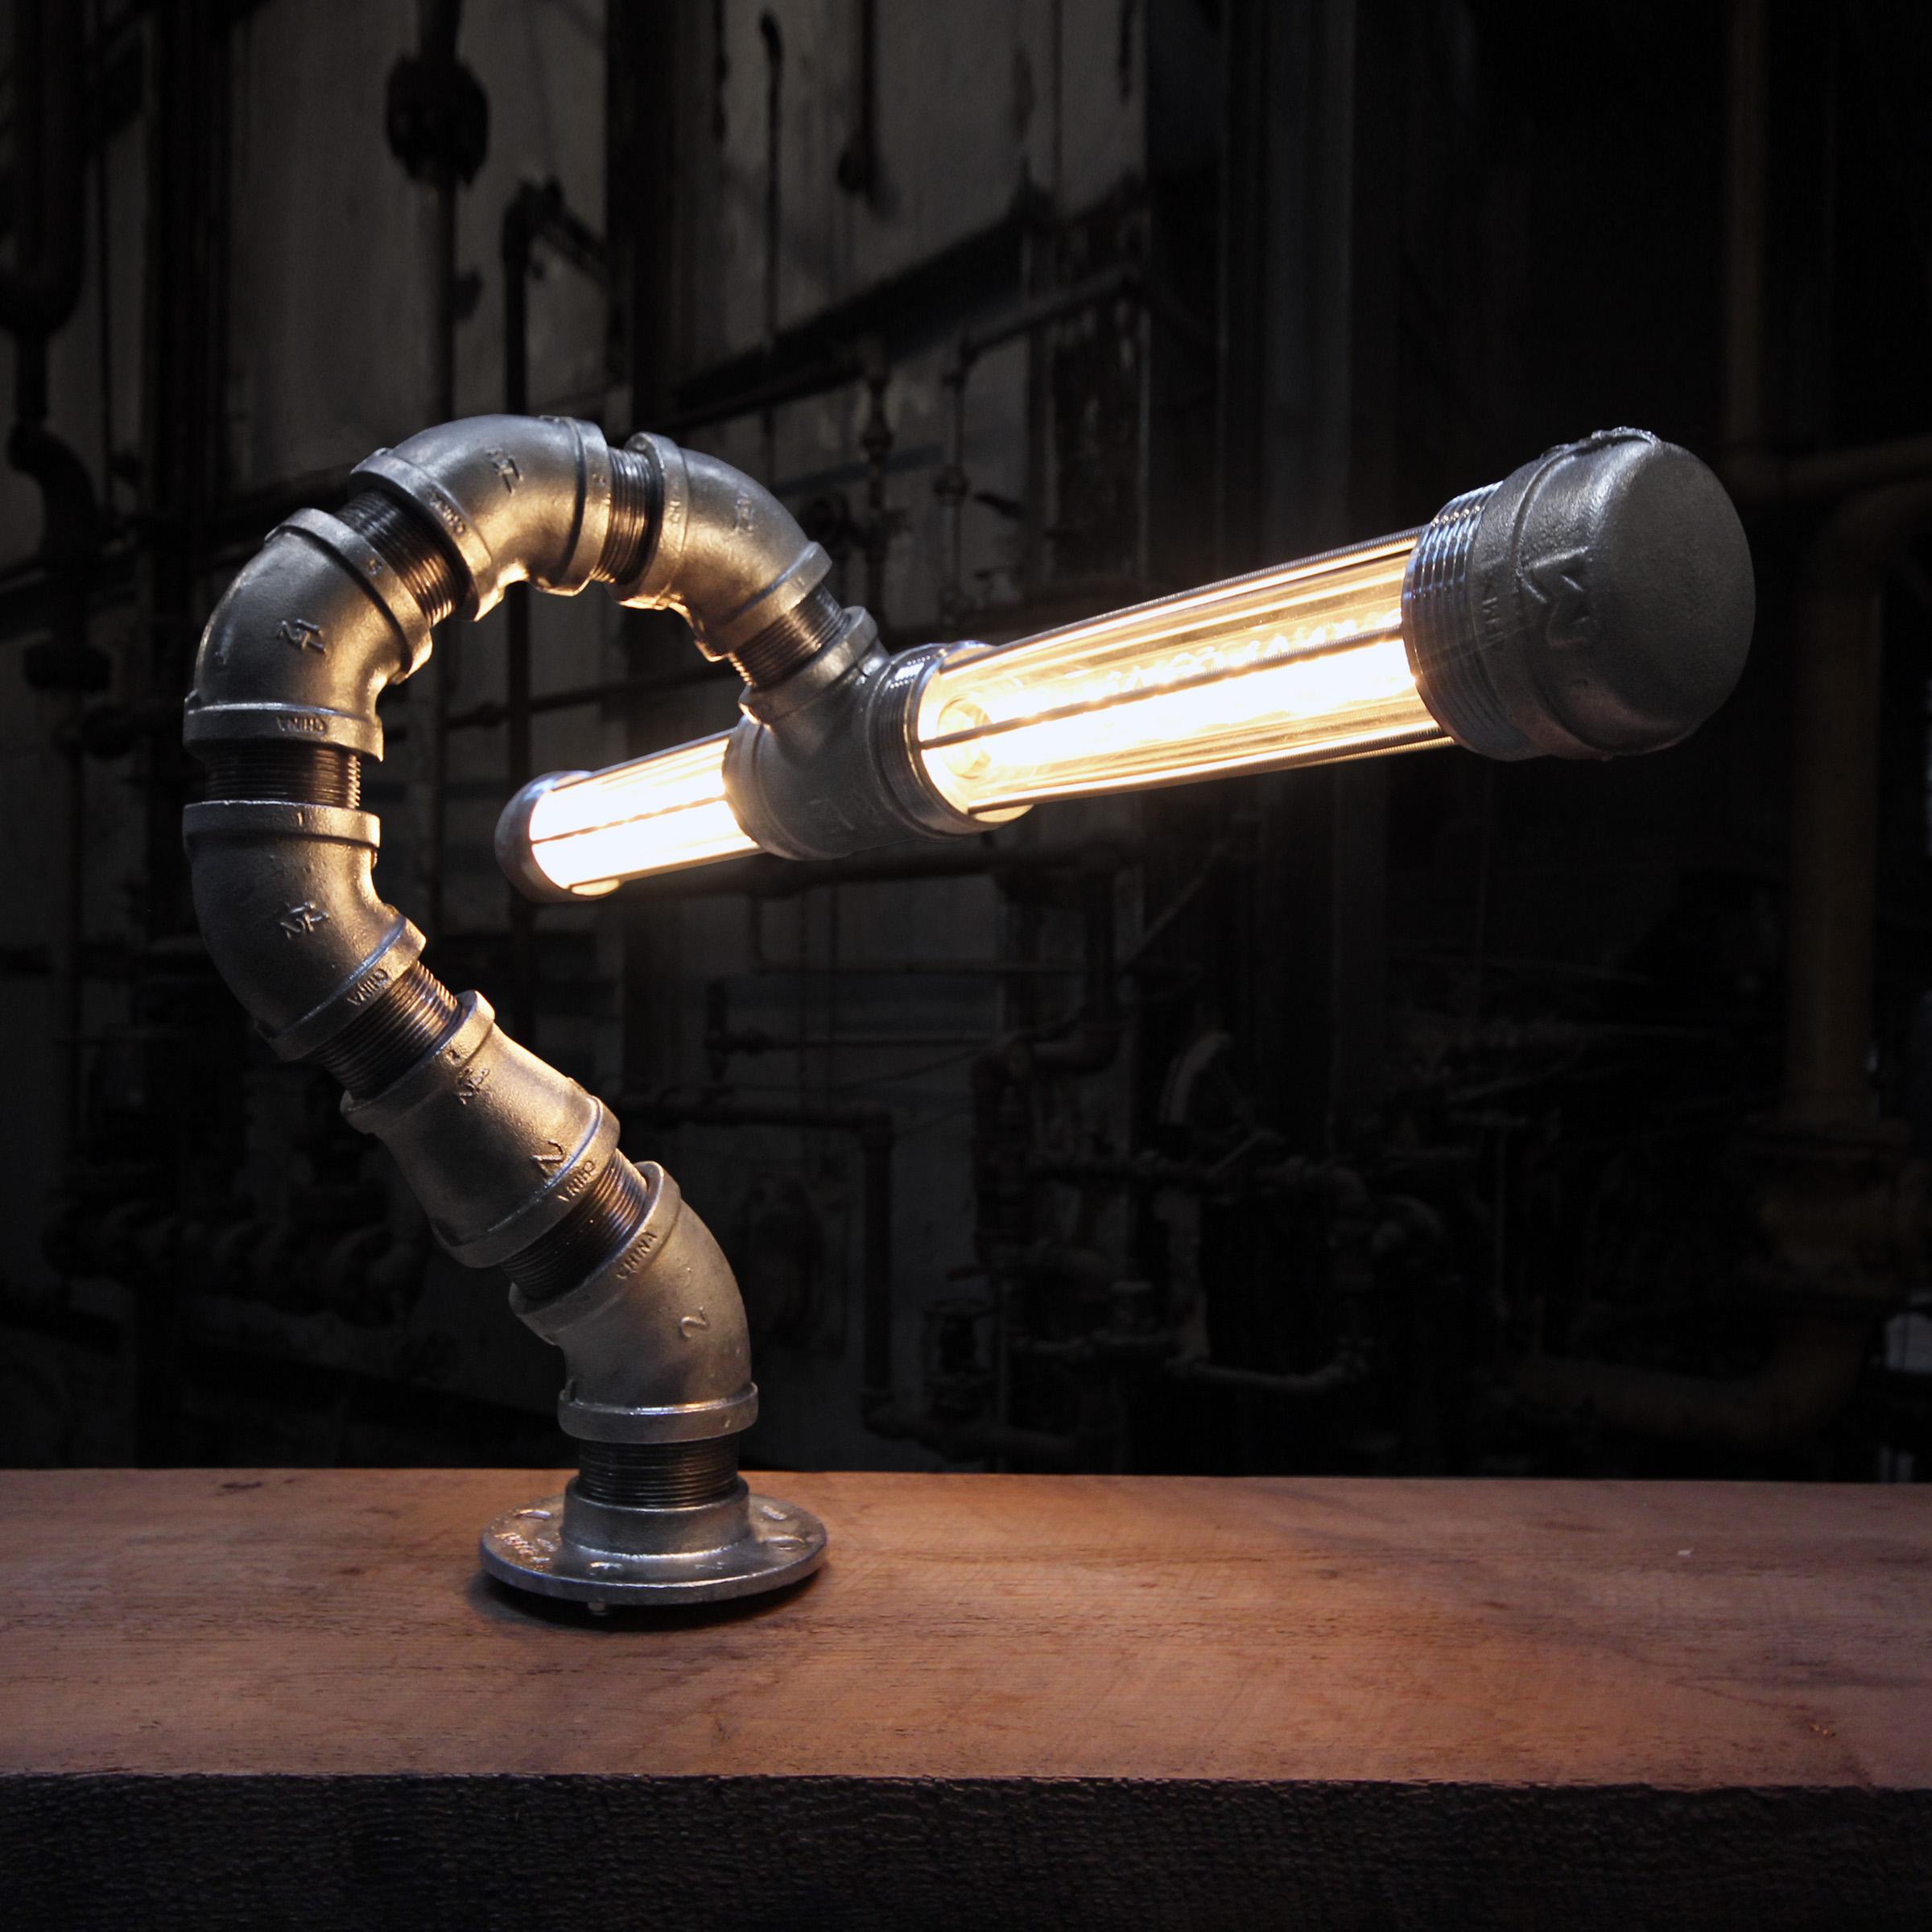 Modern Industrial Table Lamp - Industrial Light - Industrial Decor In New Condition For Sale In Bridgeport, PA